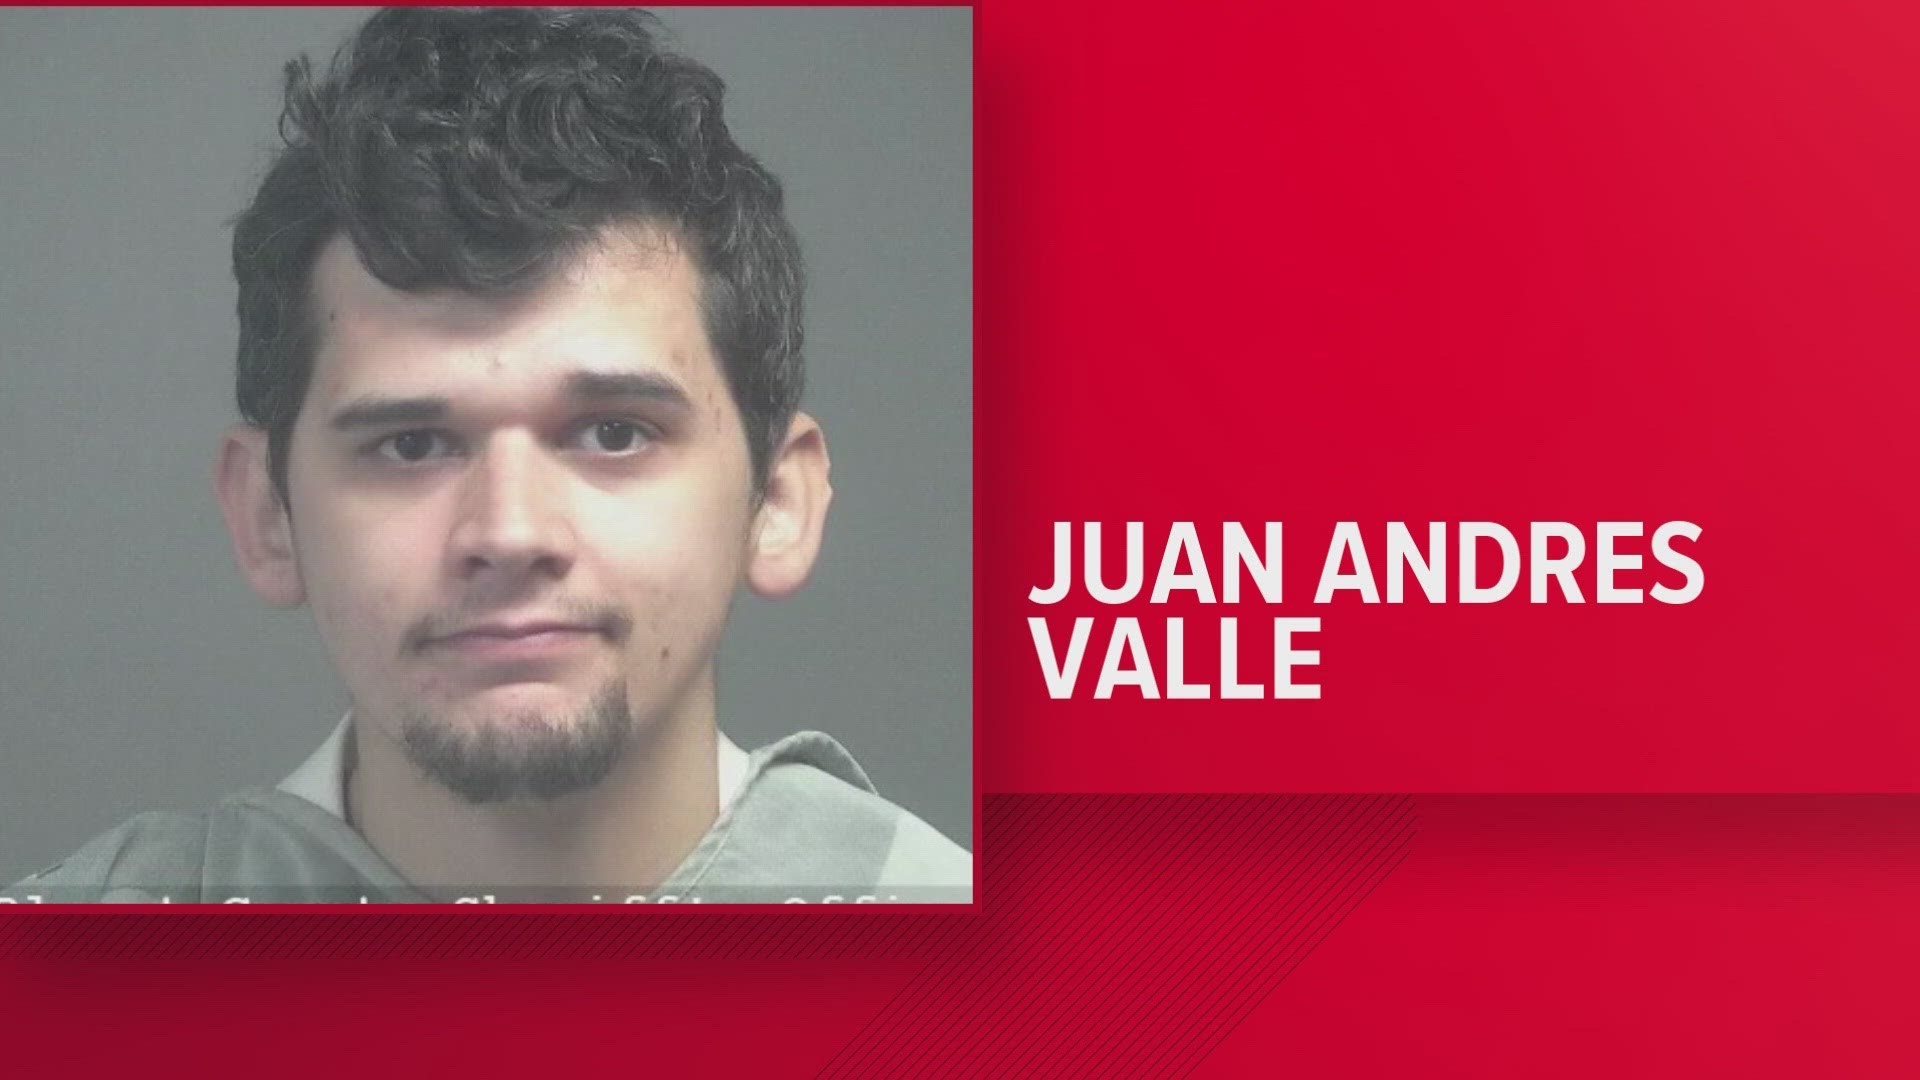 The Maryville Police Department said Juan Anders Valle, from North Carolina, was taken into custody inside the bank without incident.